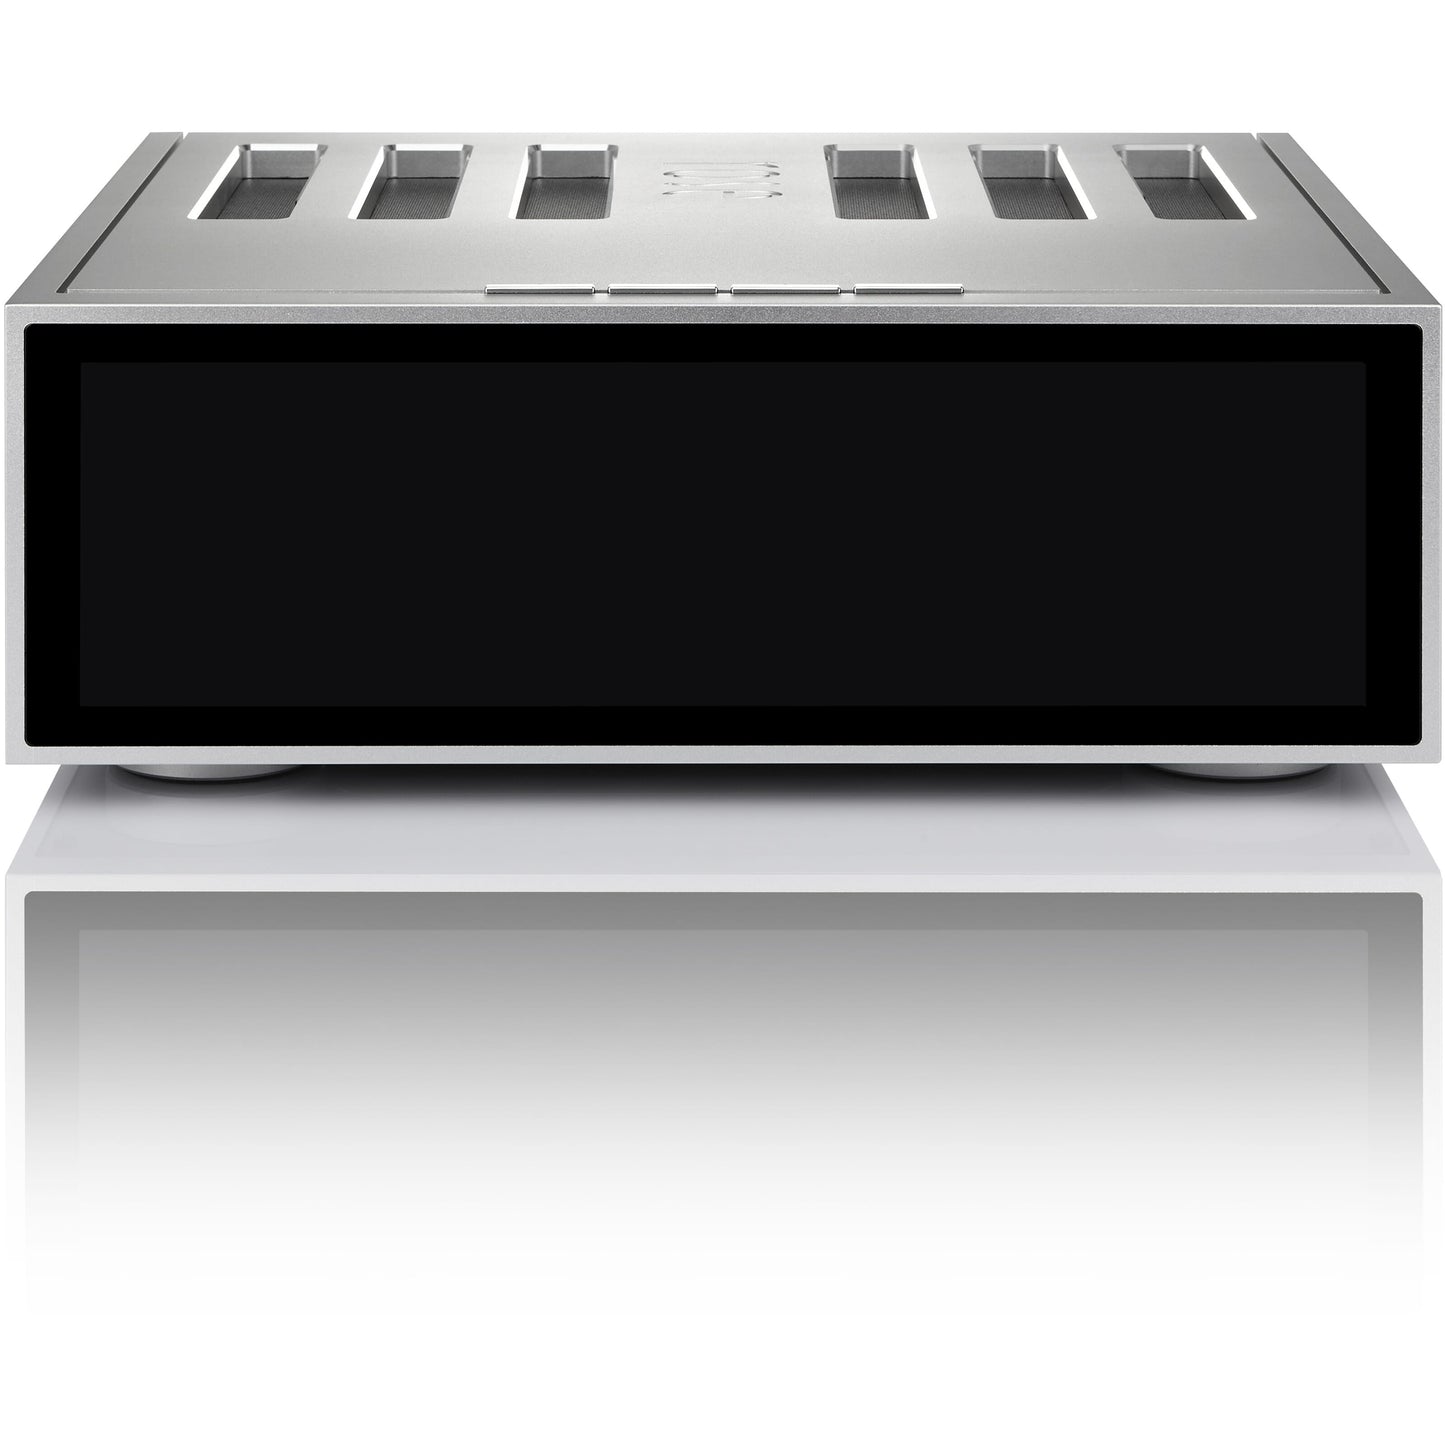 HiFi Rose - RS520 Network Streamer/Integrated Amplifier